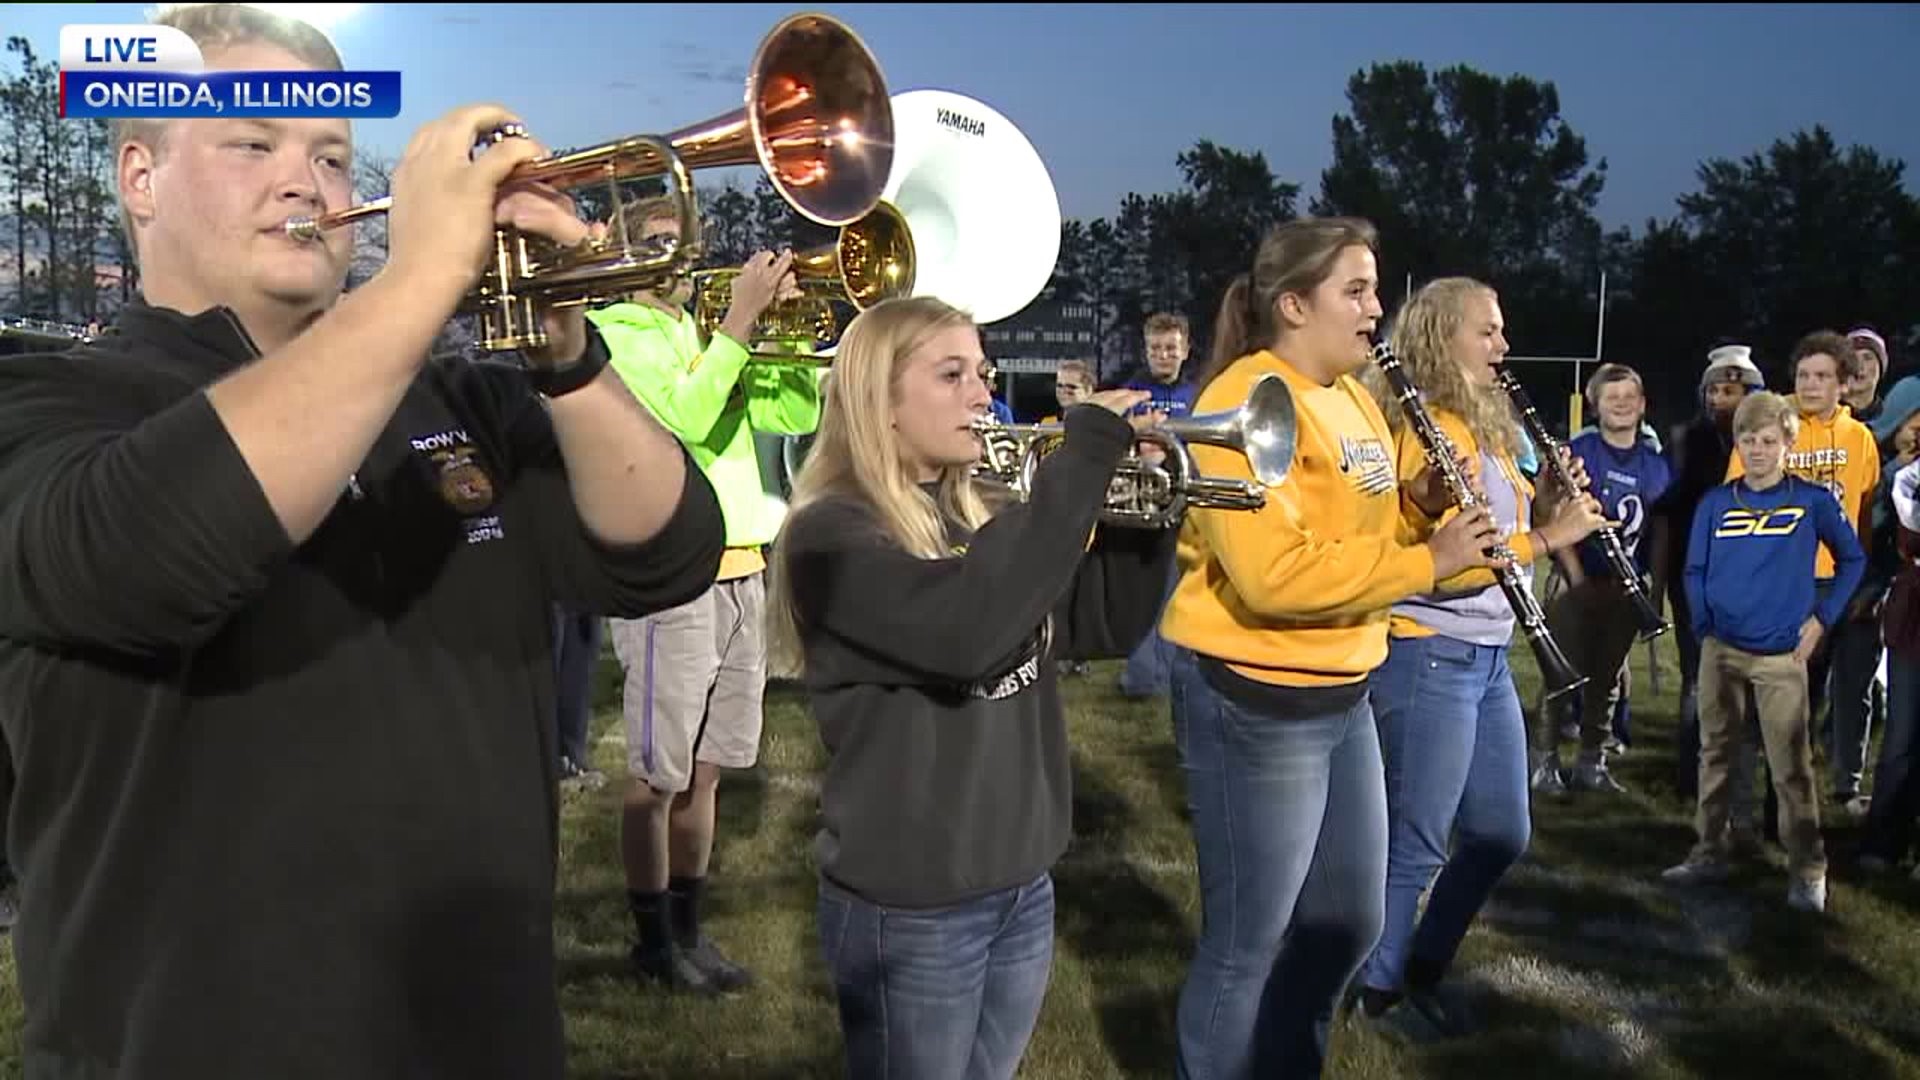 Video #5: Lots of talent in the band